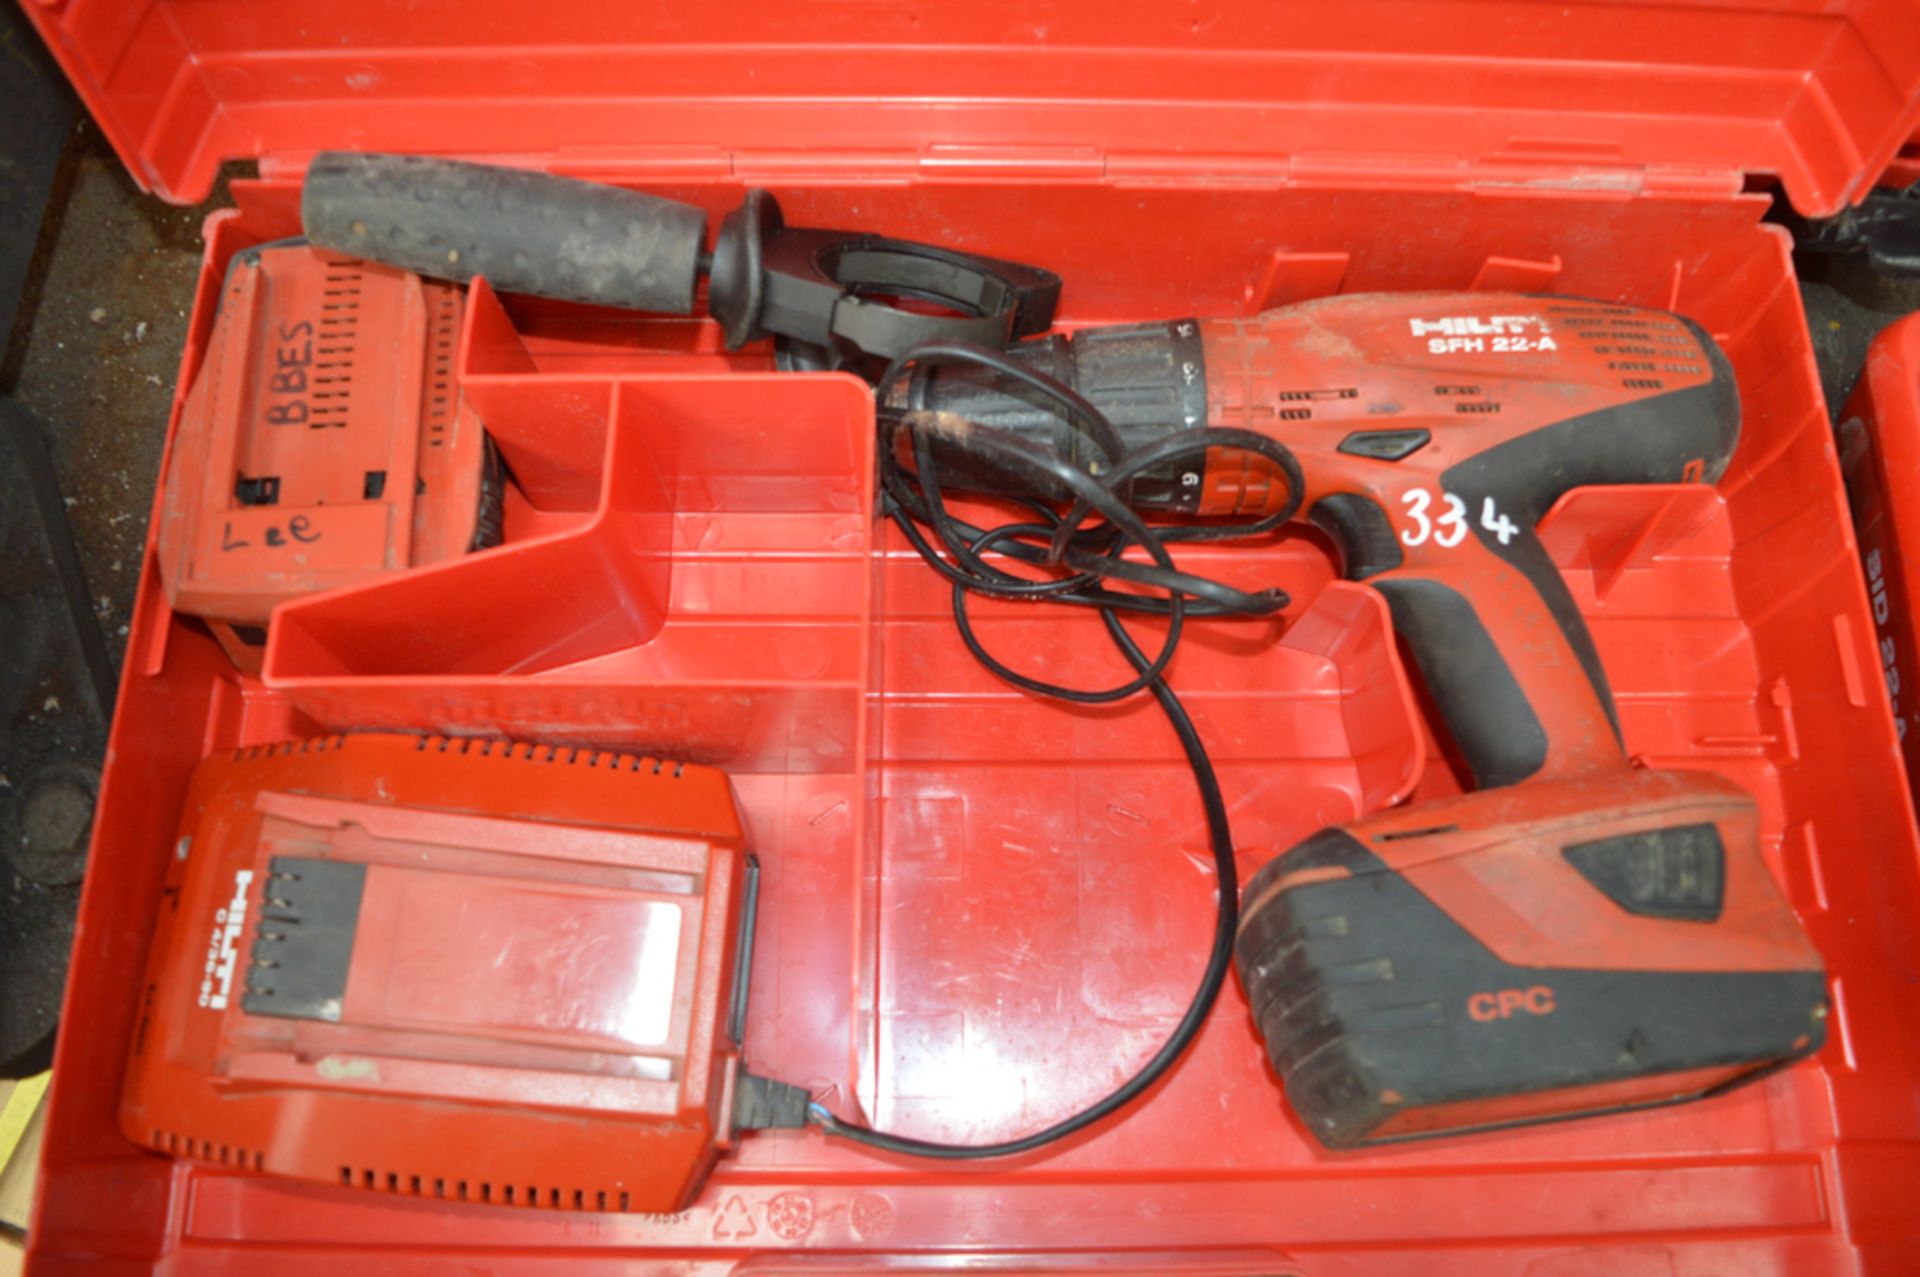 Hilti SFH 22-A cordless drill c/w 2 batteries, charger & carry case 767H